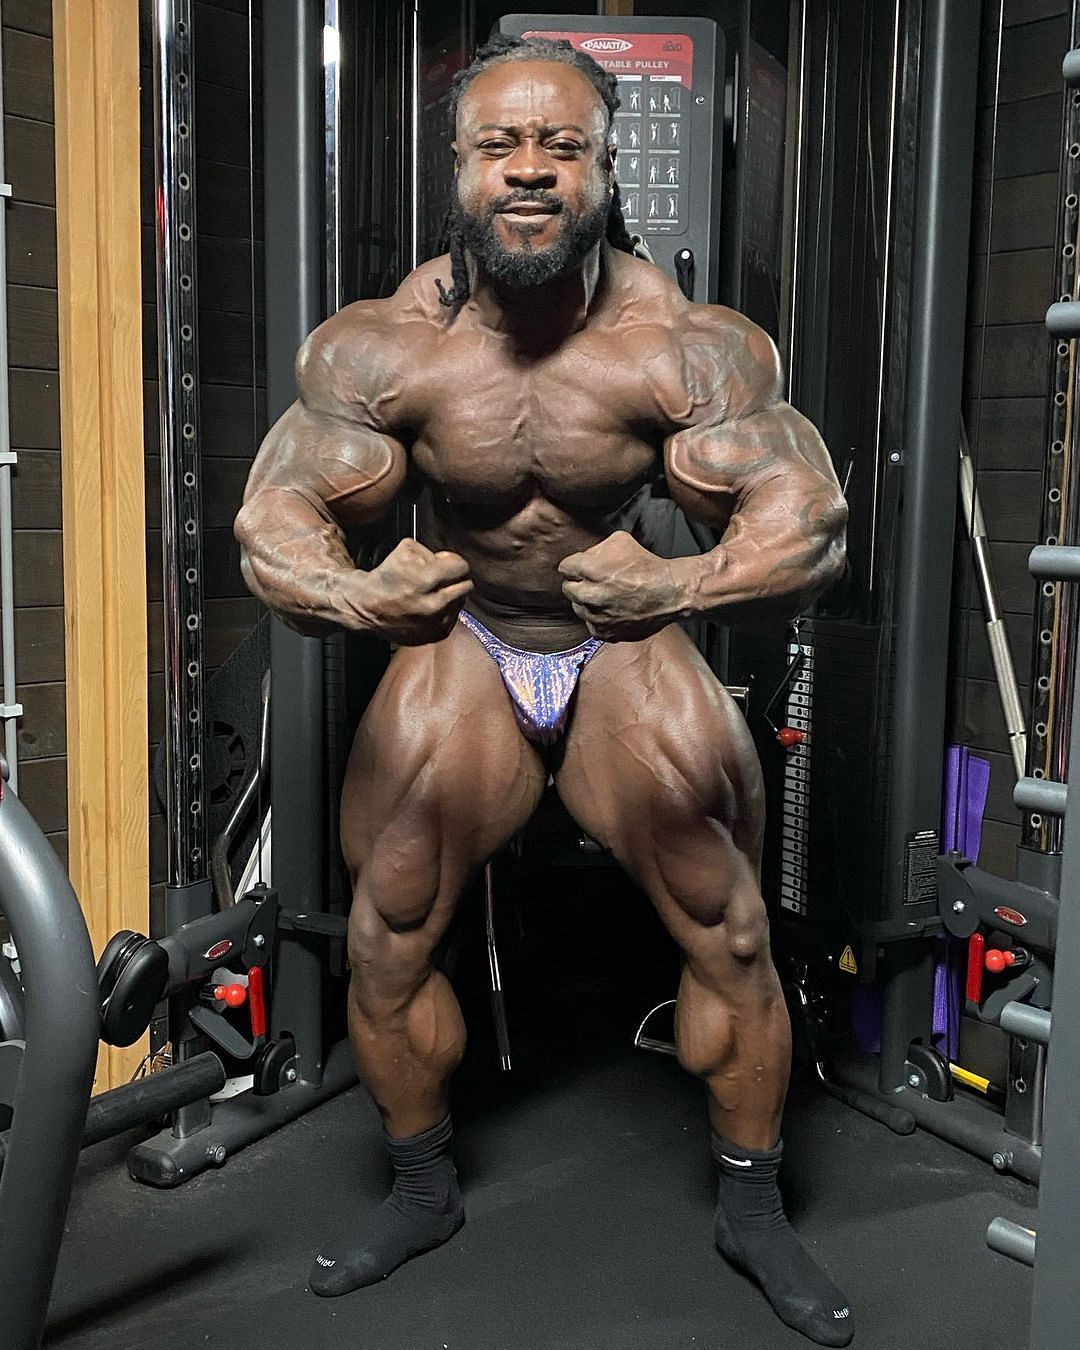 IFBB Professional Bodybuilder and sponsored athlete from Ghana, William Bonac, who finished second in the 2022 Arnold Classic shows off his massive physique ahead of the 2023 Arnold Classic (Image via Instagram/@william_bonac)